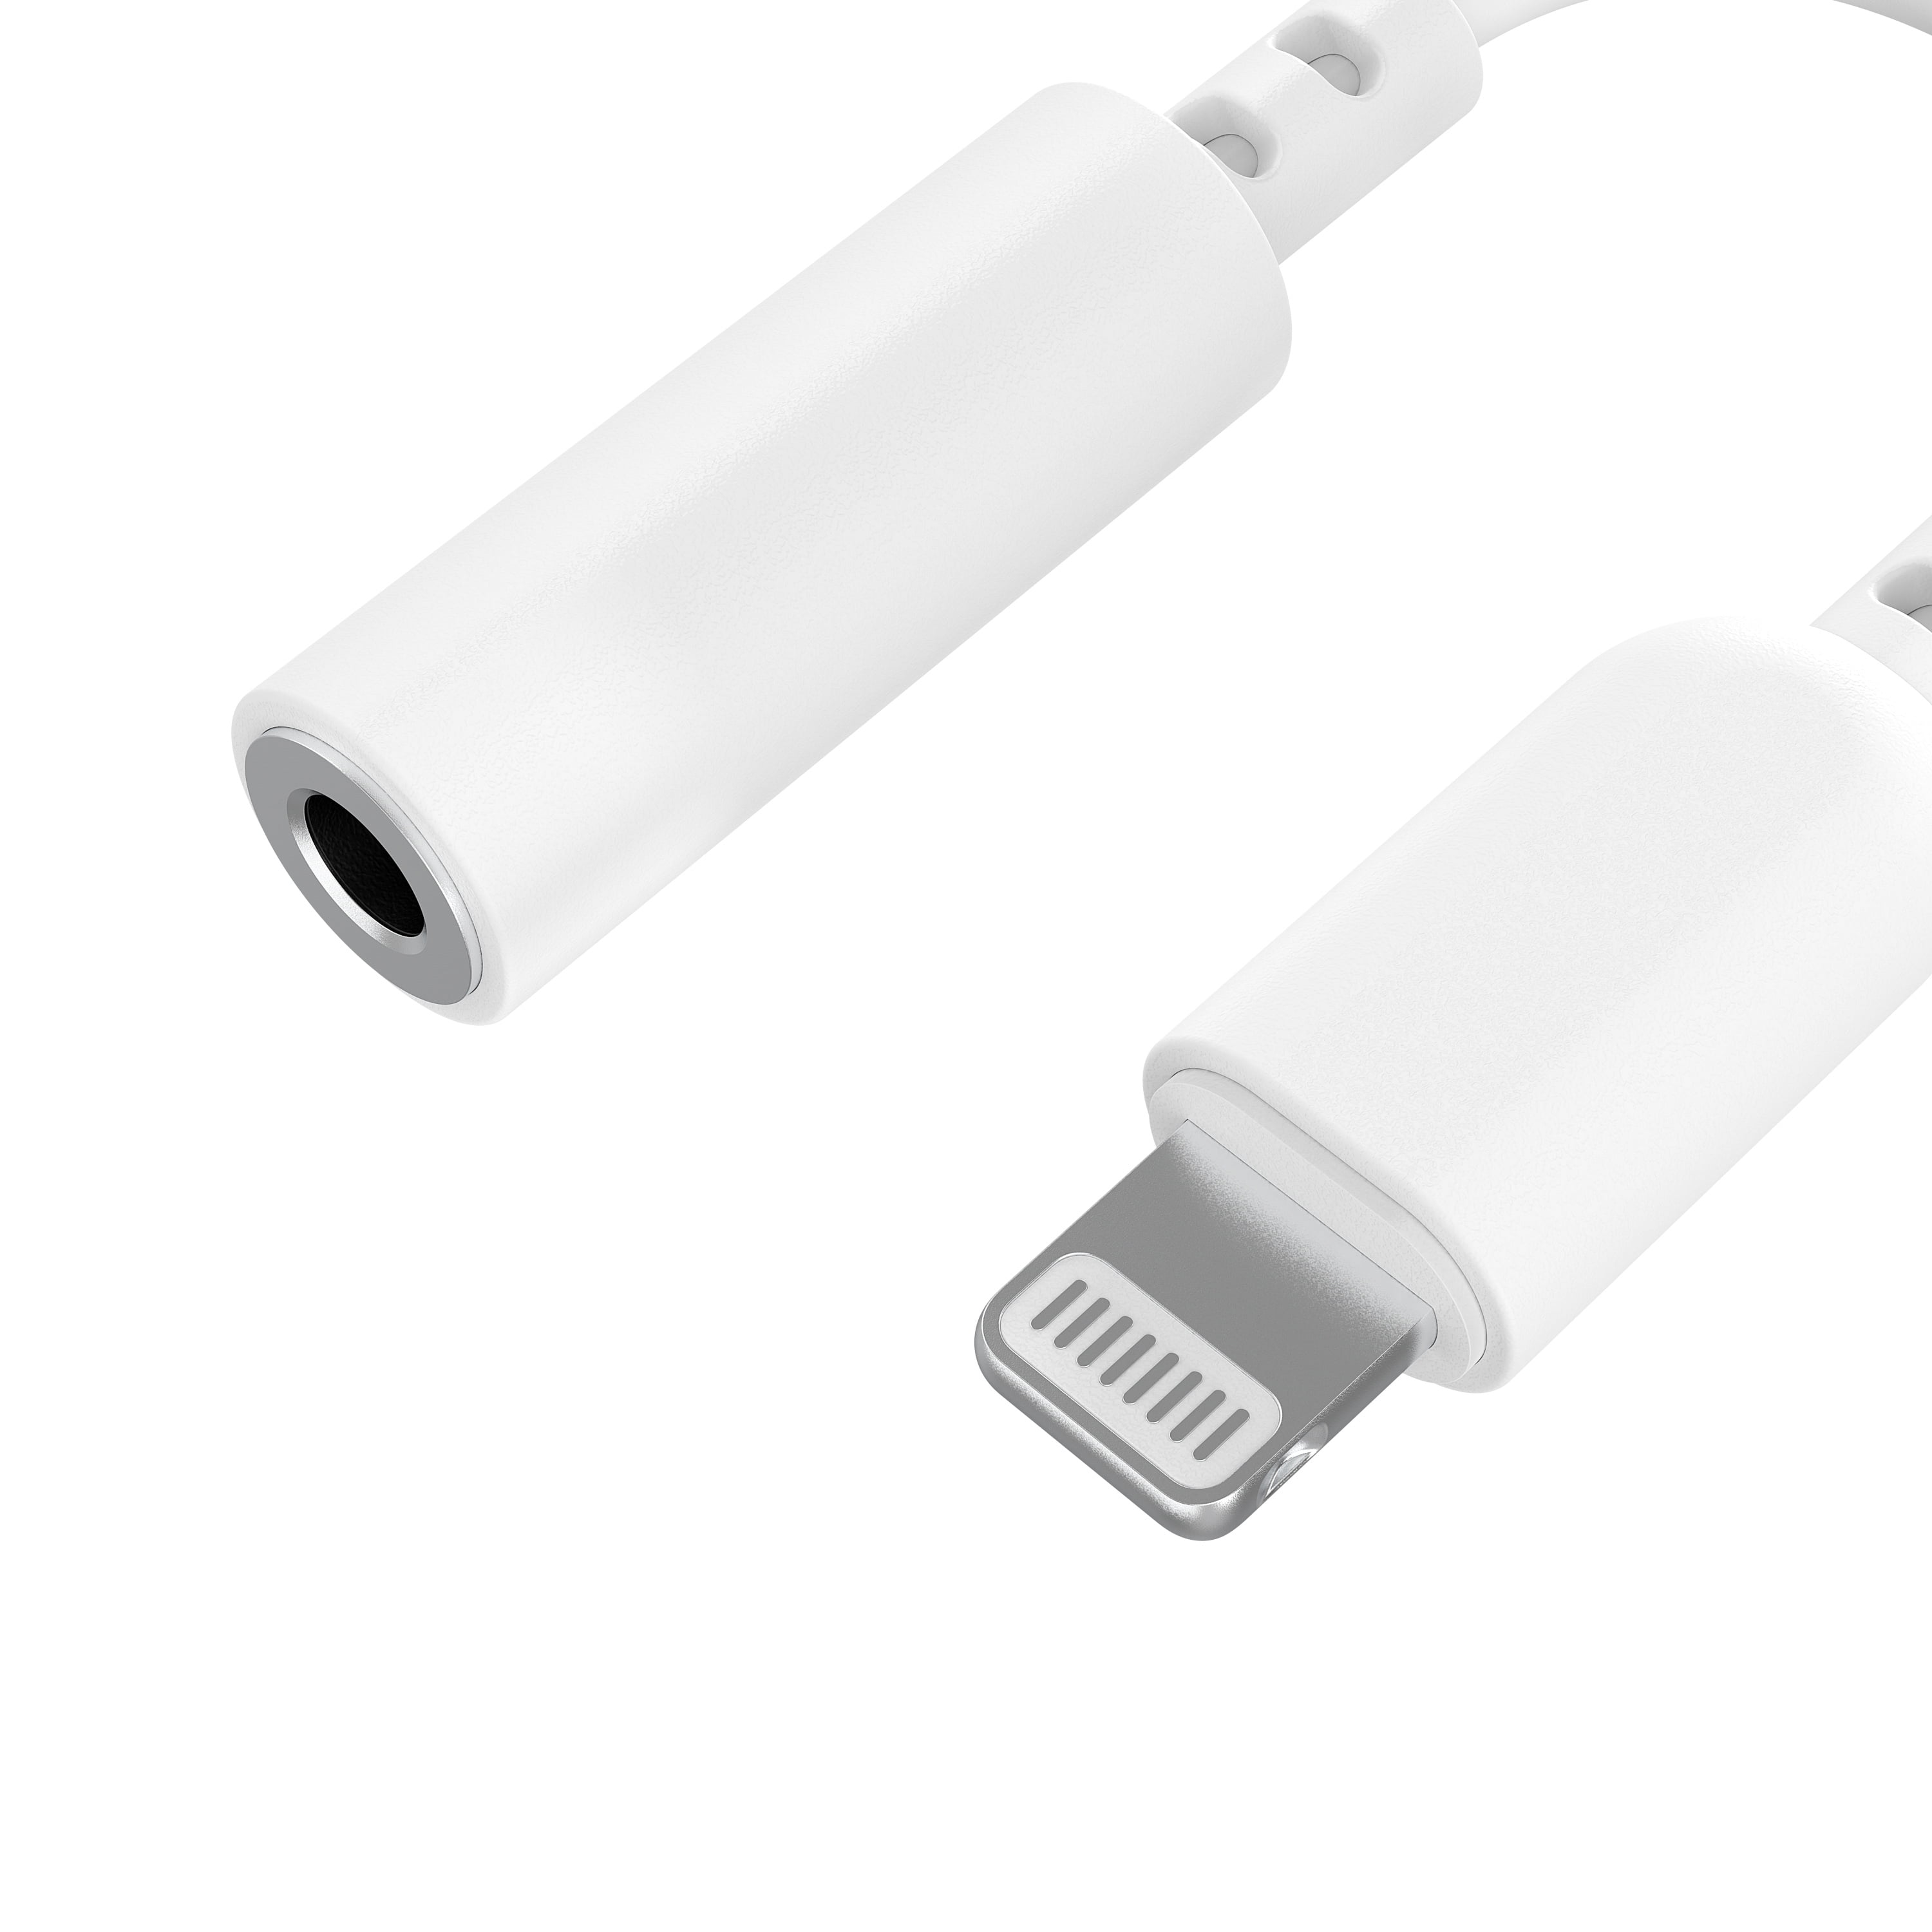 onn. to 3.5 mm AUX Adapter, White - Walmart.com